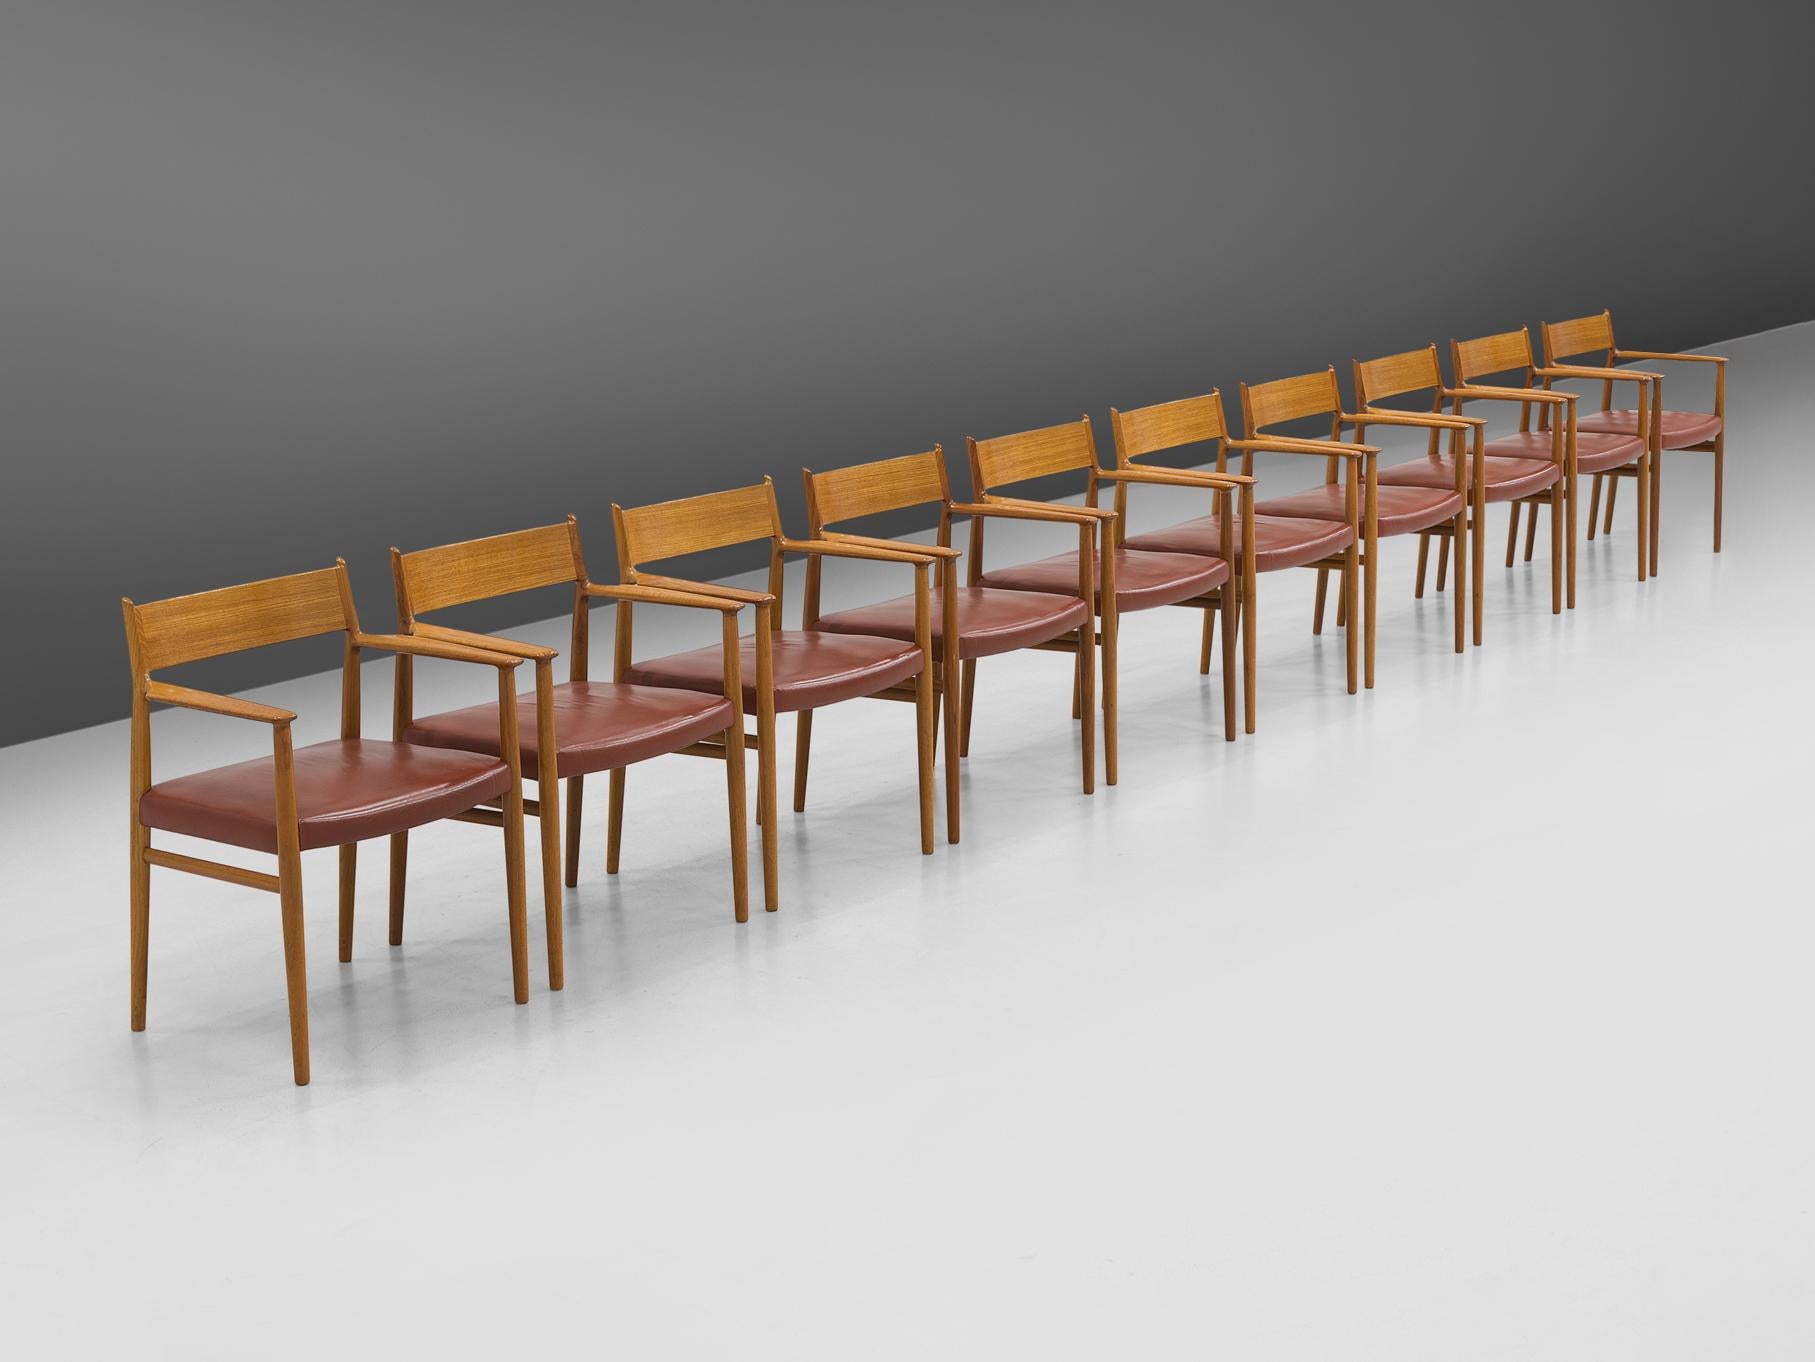 Arne Vodder for Sibast Møbler, set of ten dining room chairs model 418, teak, leather, Denmark, 1960s

These well-executed set of armchairs by Arne Vodder show beautiful lines in every wooden element. The construction of the chair is based on a